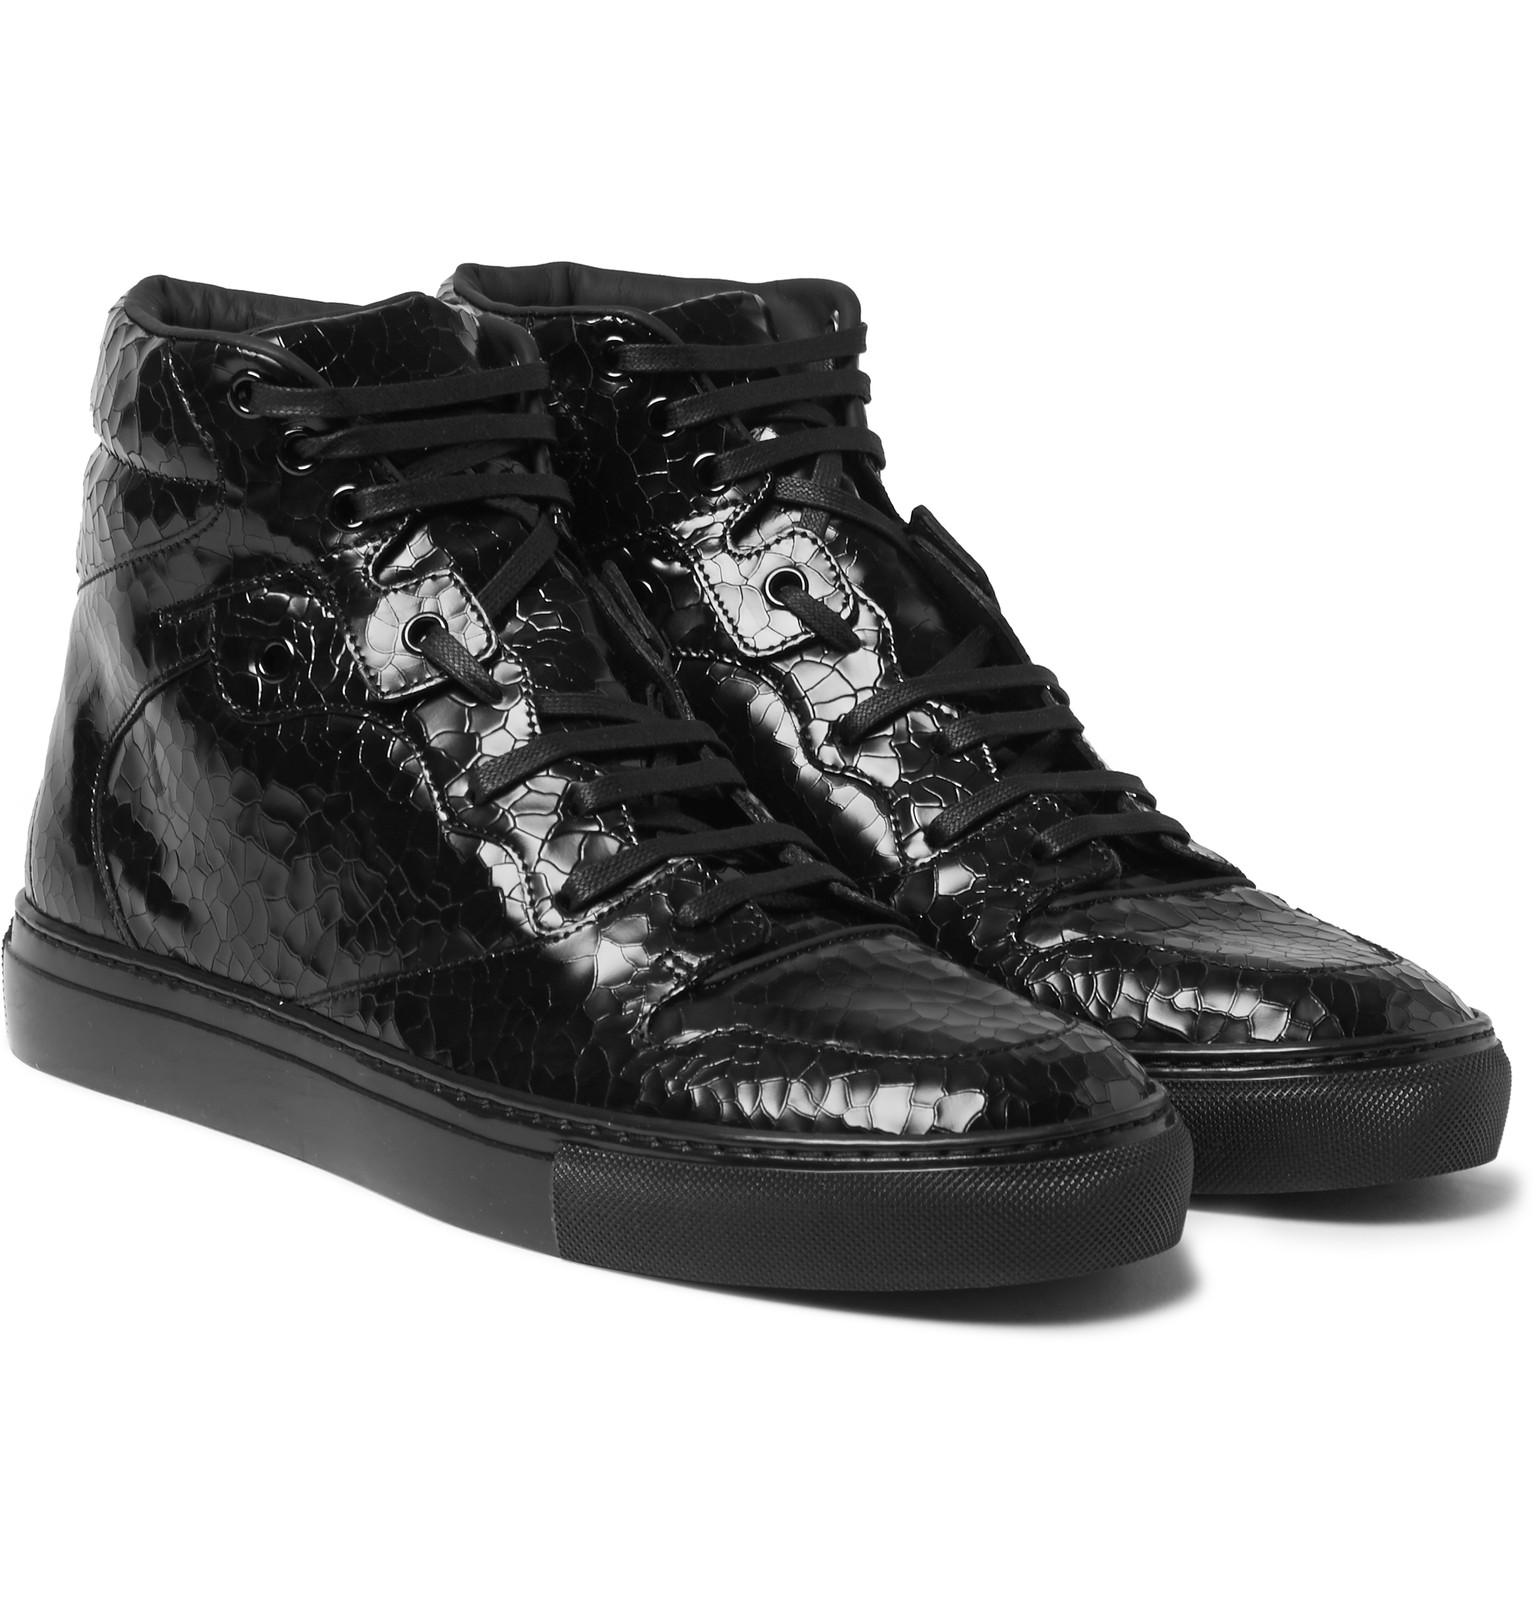 balenciaga patent leather sneakers